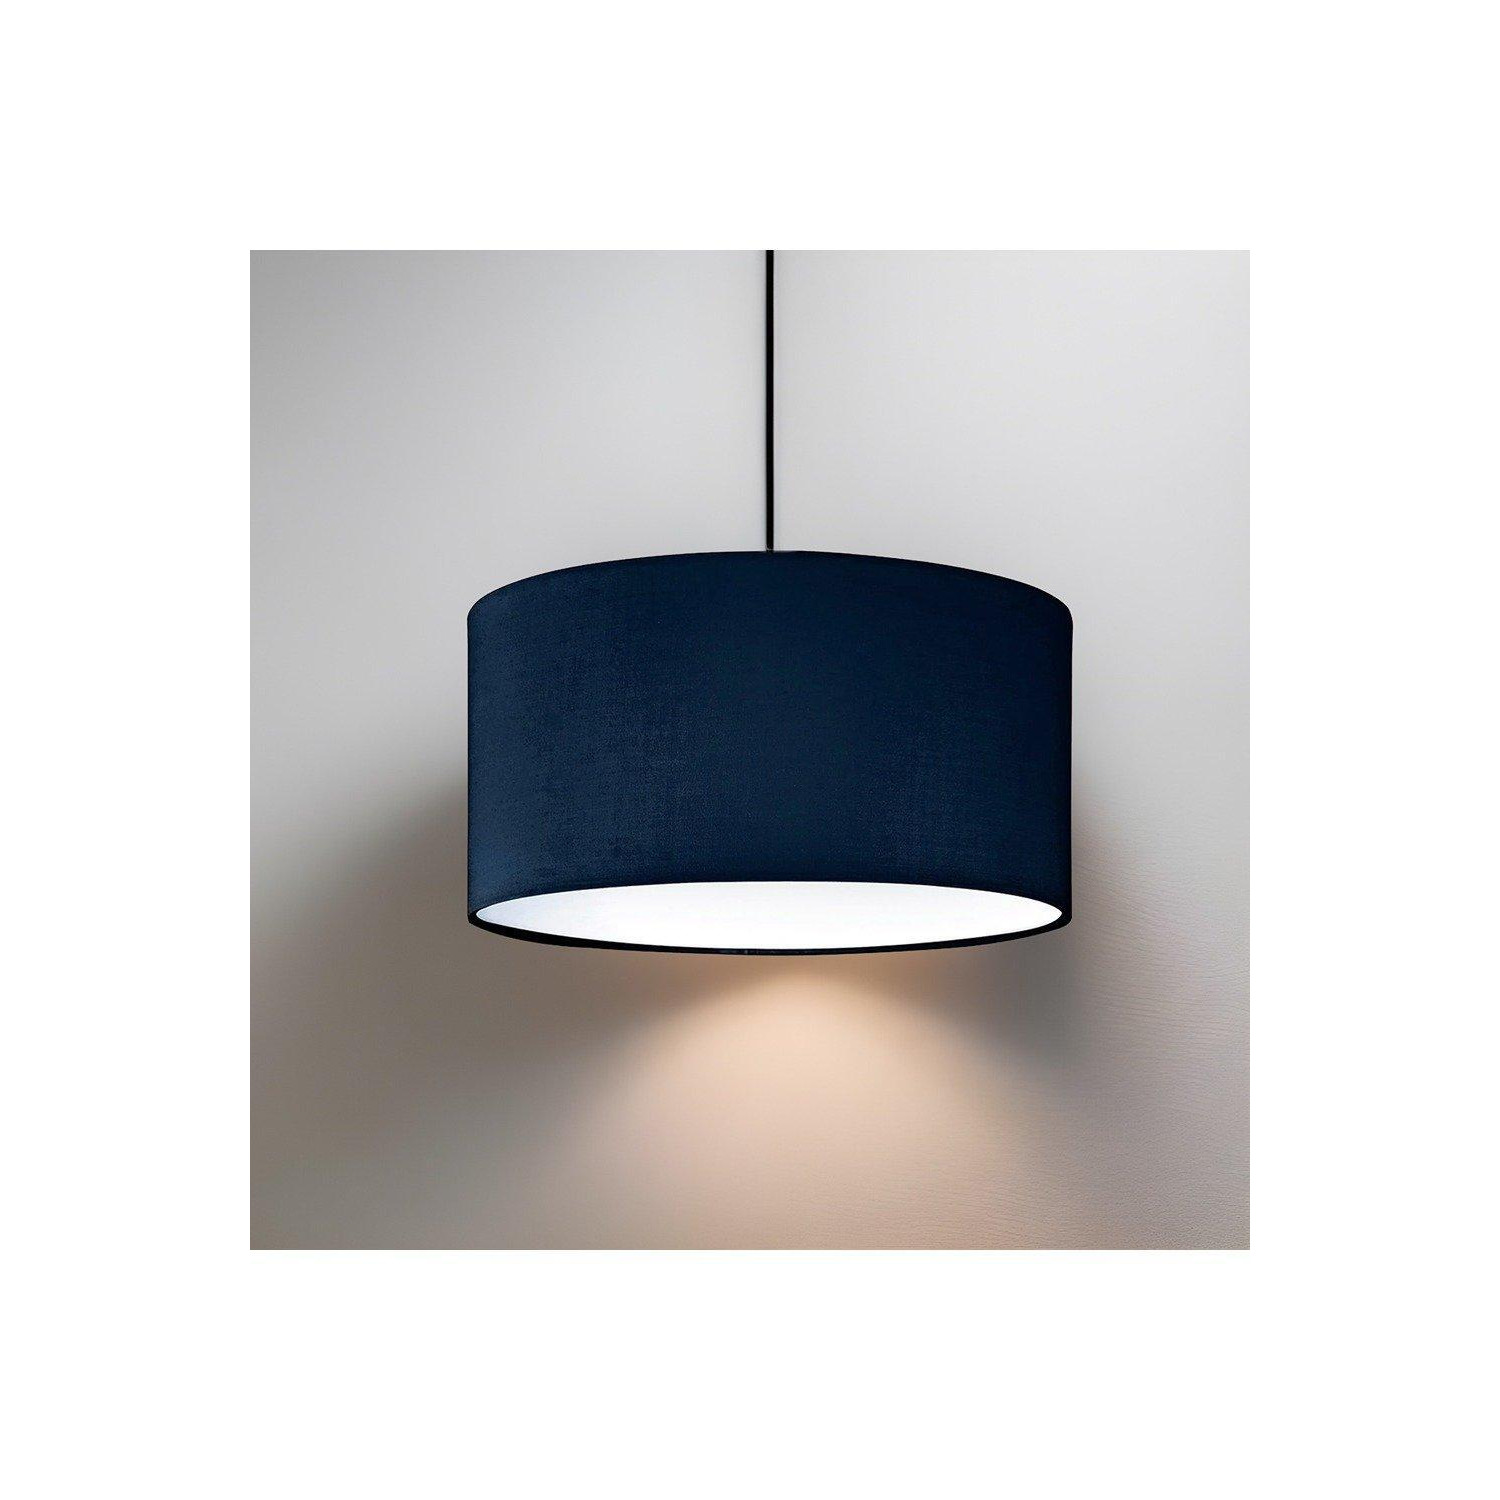 'Lucia' Navy Blue Fabric Ceiling Lamp Shade With Frosted Diffuser - image 1